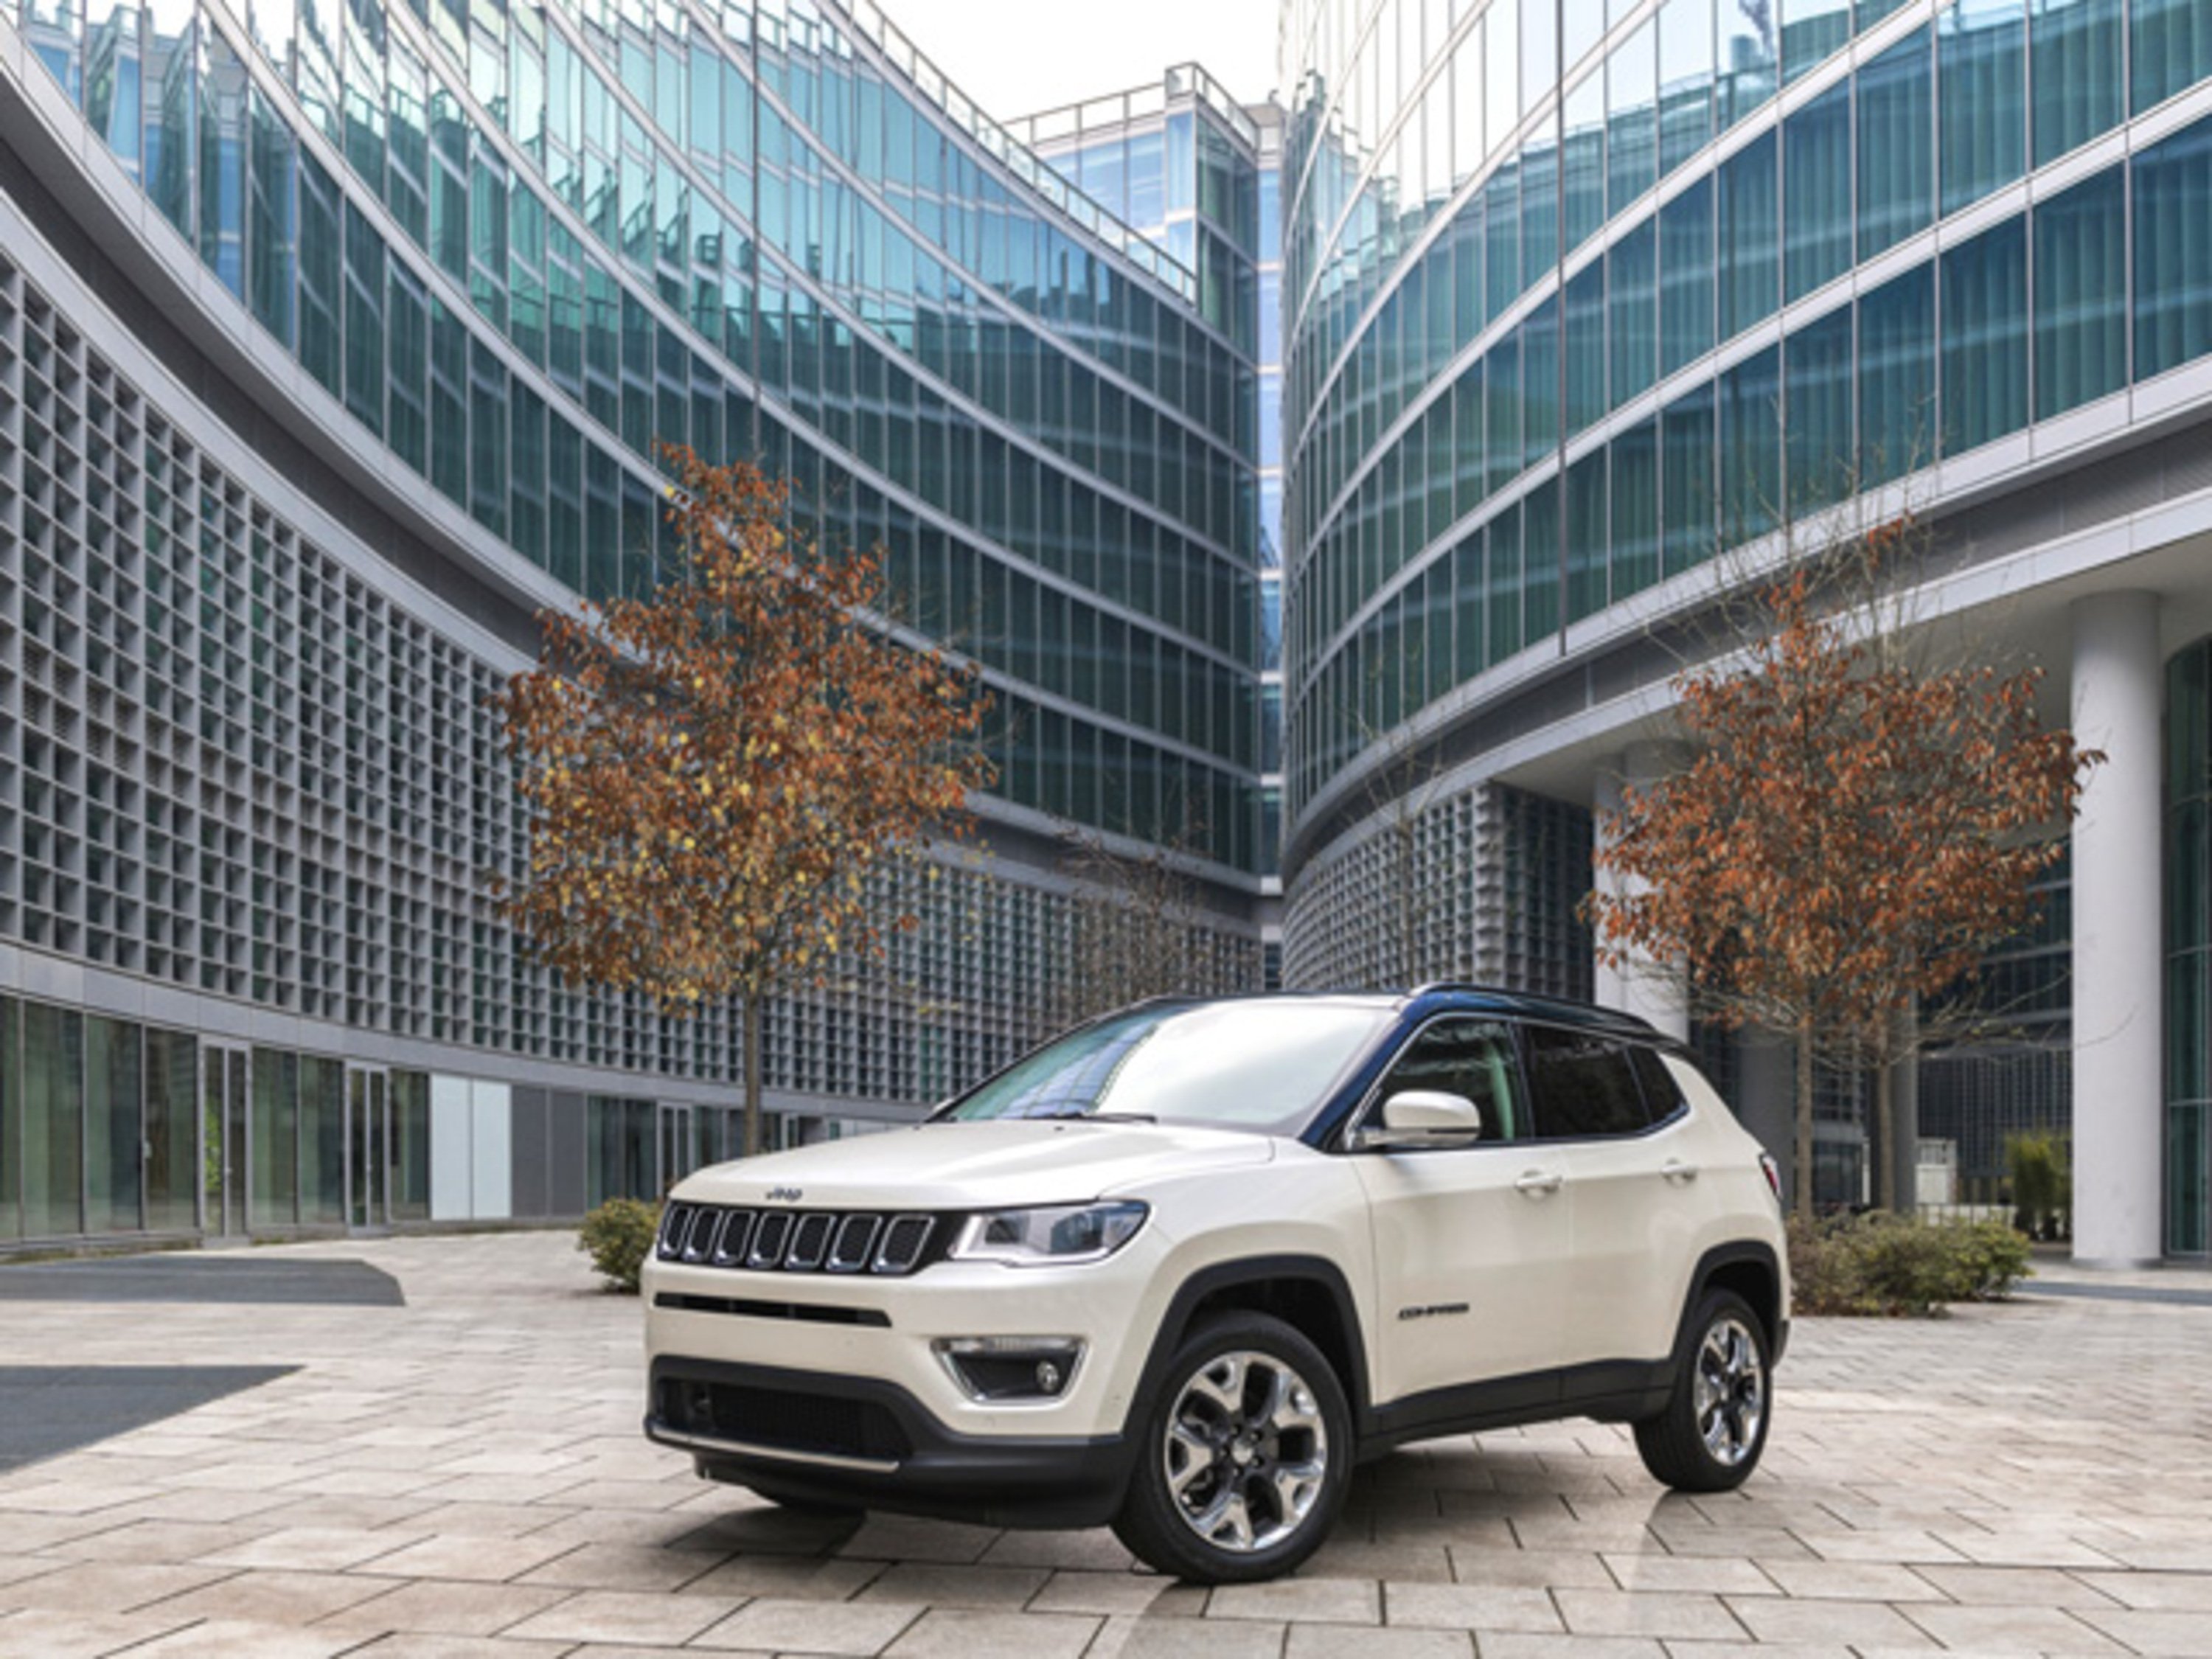 Jeep Compass 2.0 Multijet II aut. 4WD Opening Edition